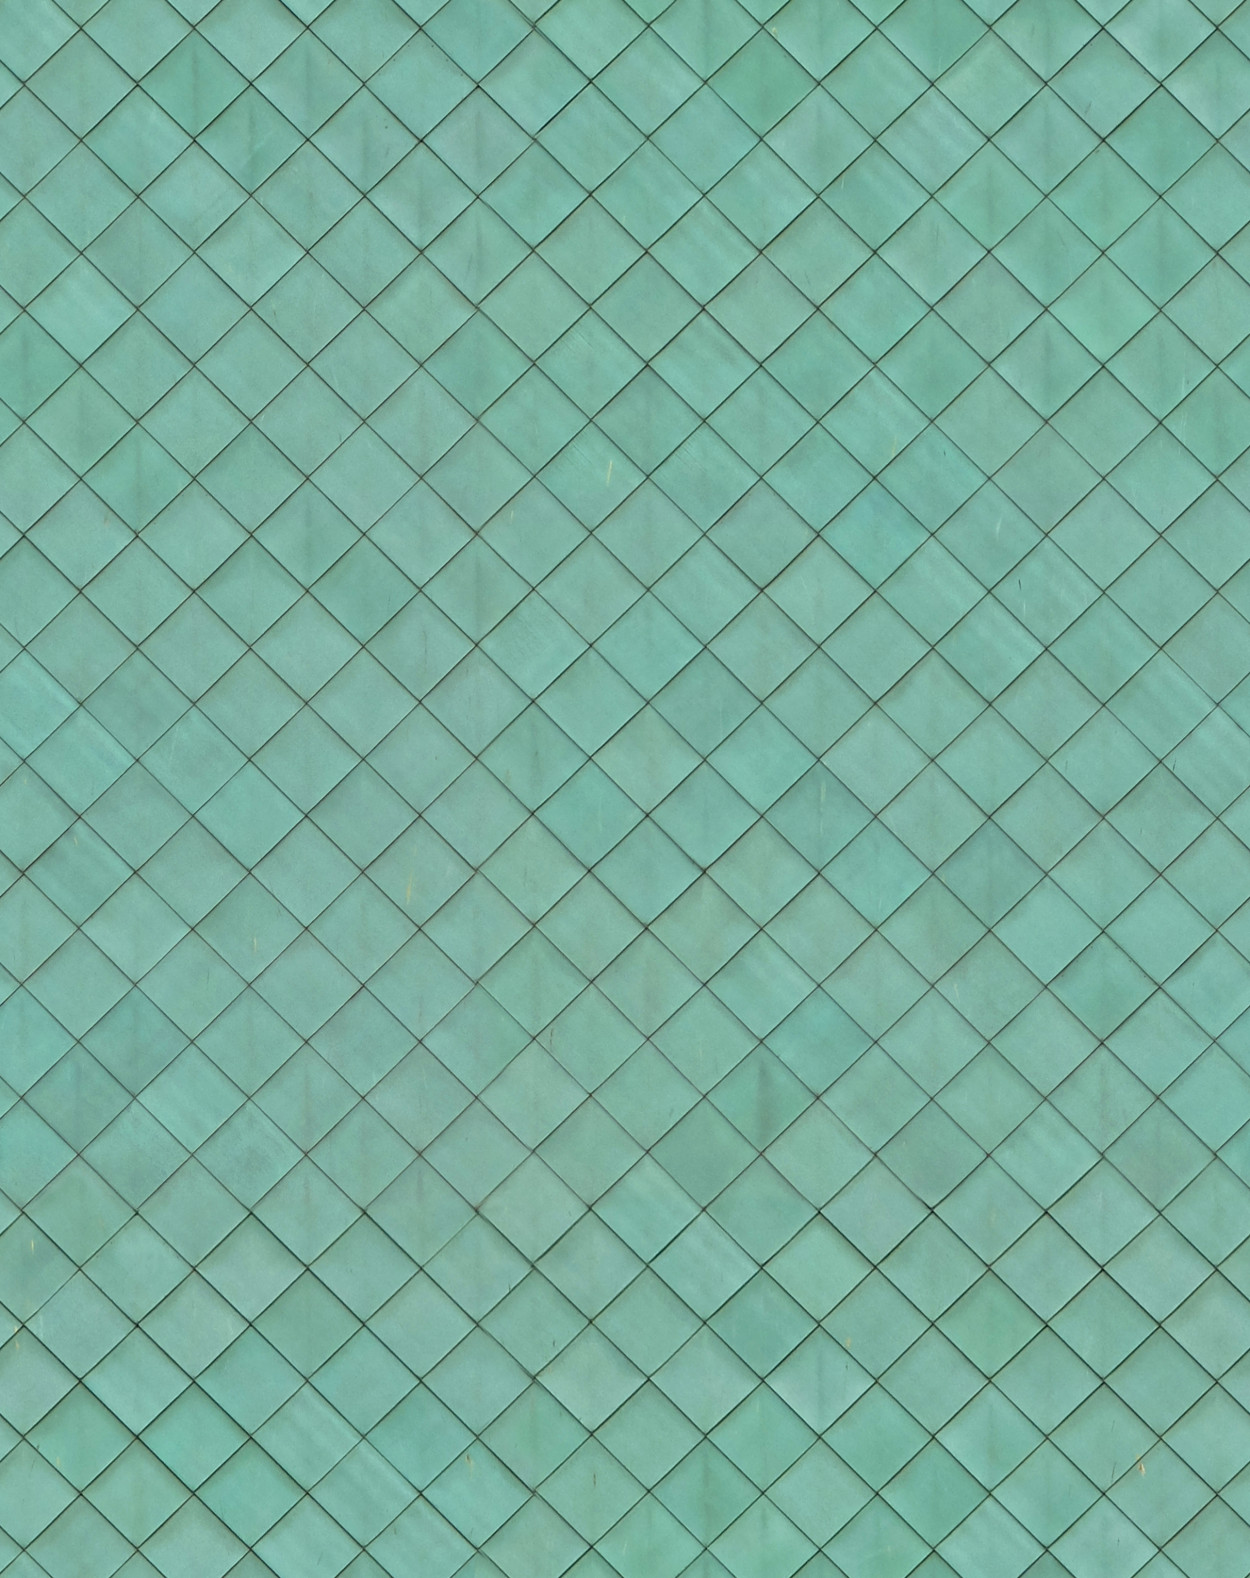 A seamless weathered copper lattice cladding texture for use in architectural drawings and 3D models